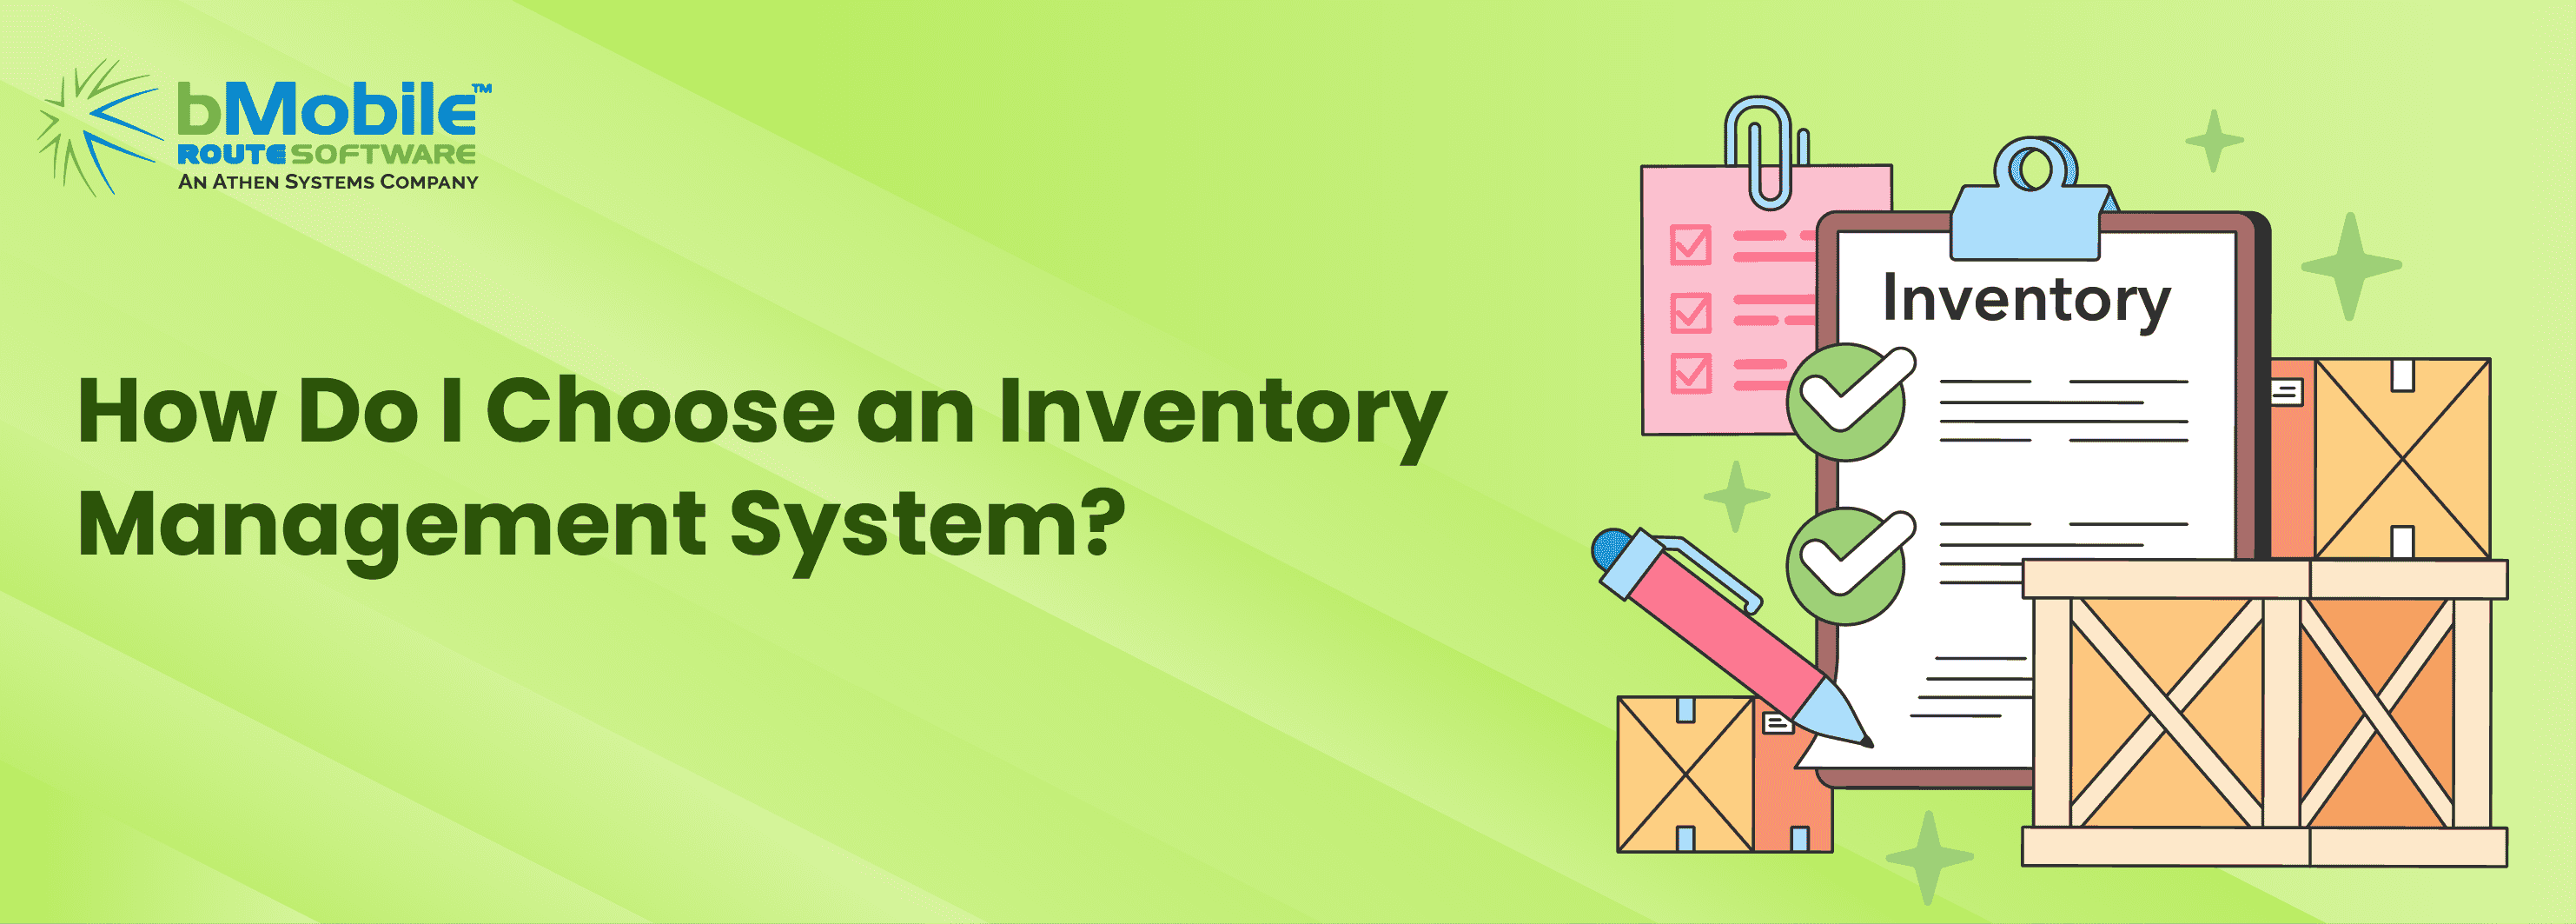 How Do I Choose an Inventory Management System